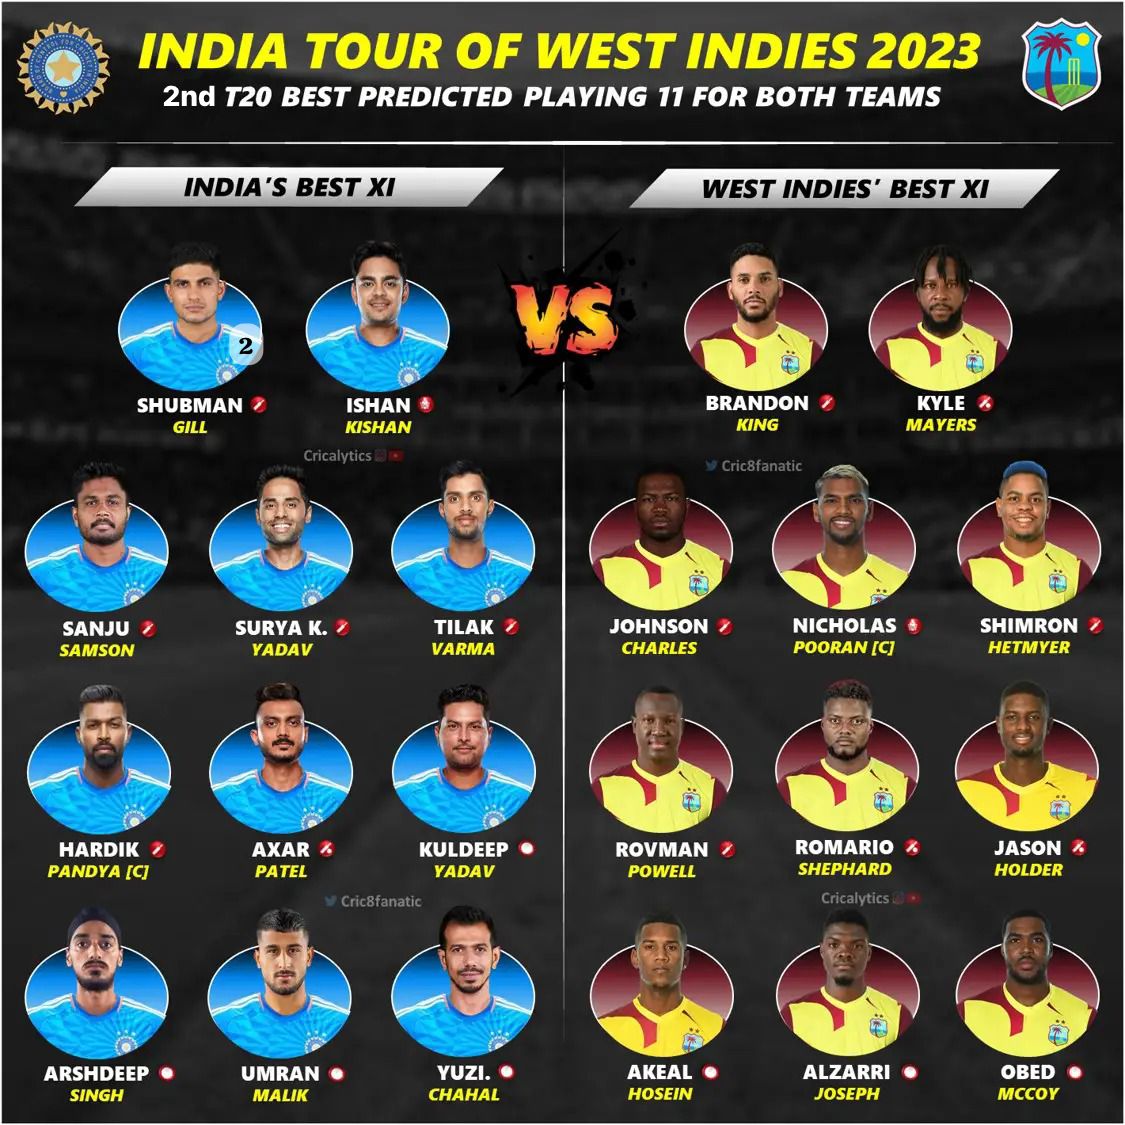 India vs West Indies 2nd T20 Prediction Playing Eleven (2023)